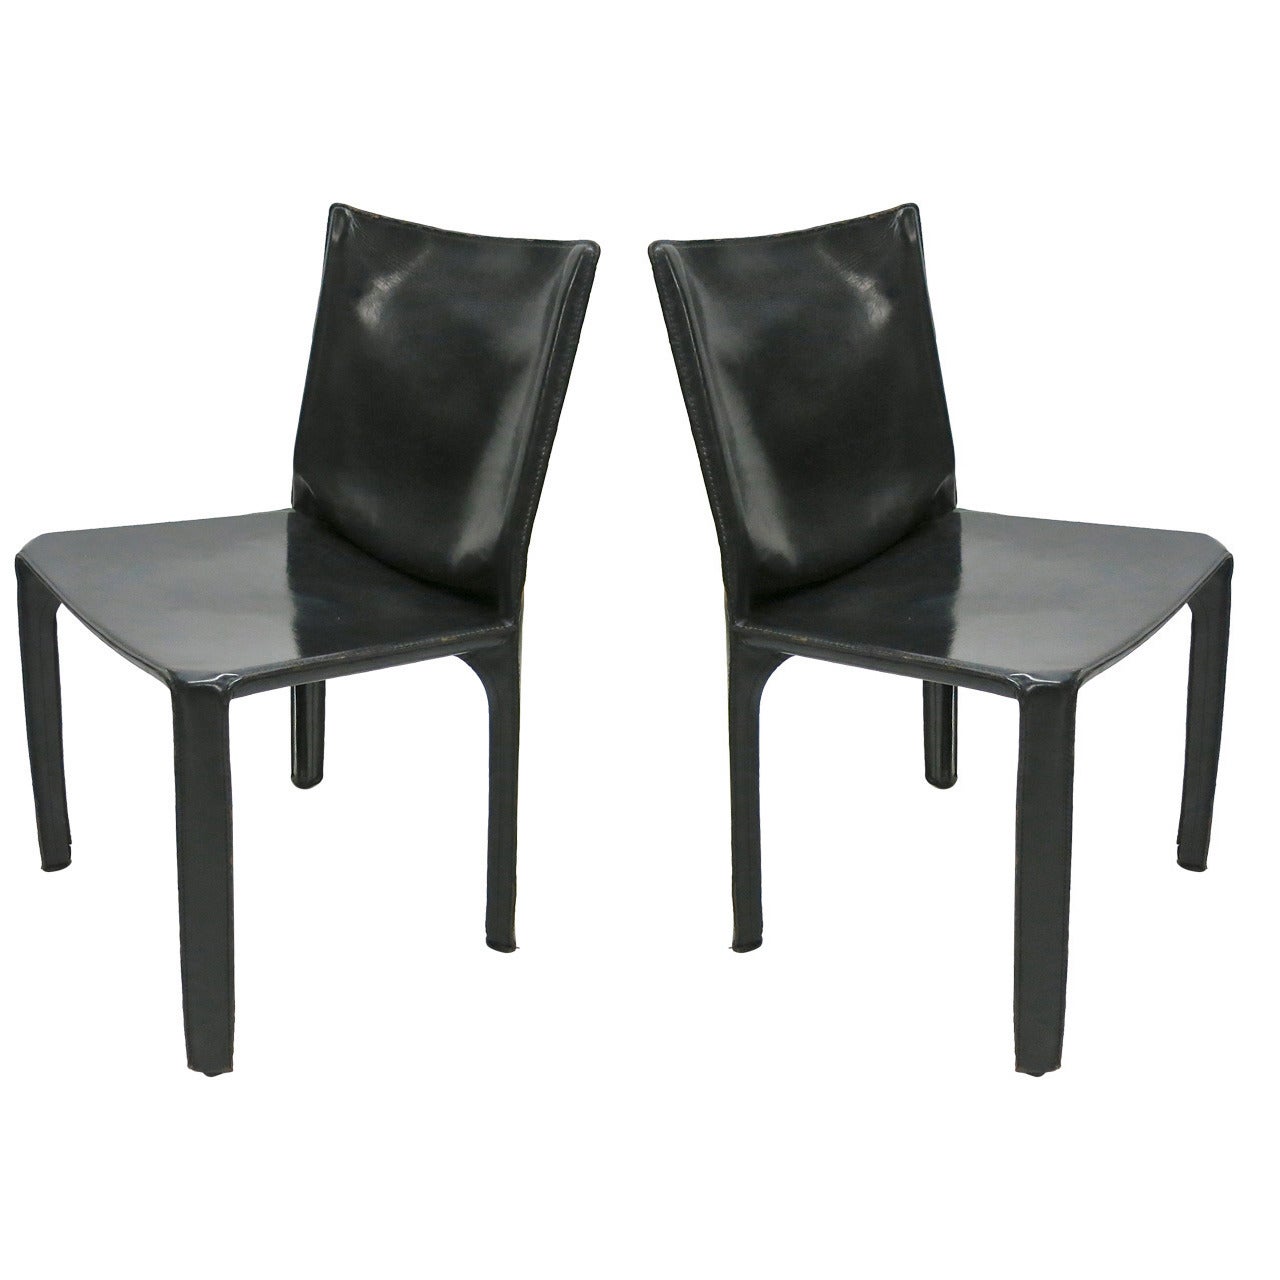 Pair of Cab Chairs Signed Cassina C-5 1976 Model No. 412 Made in Milan, Italy